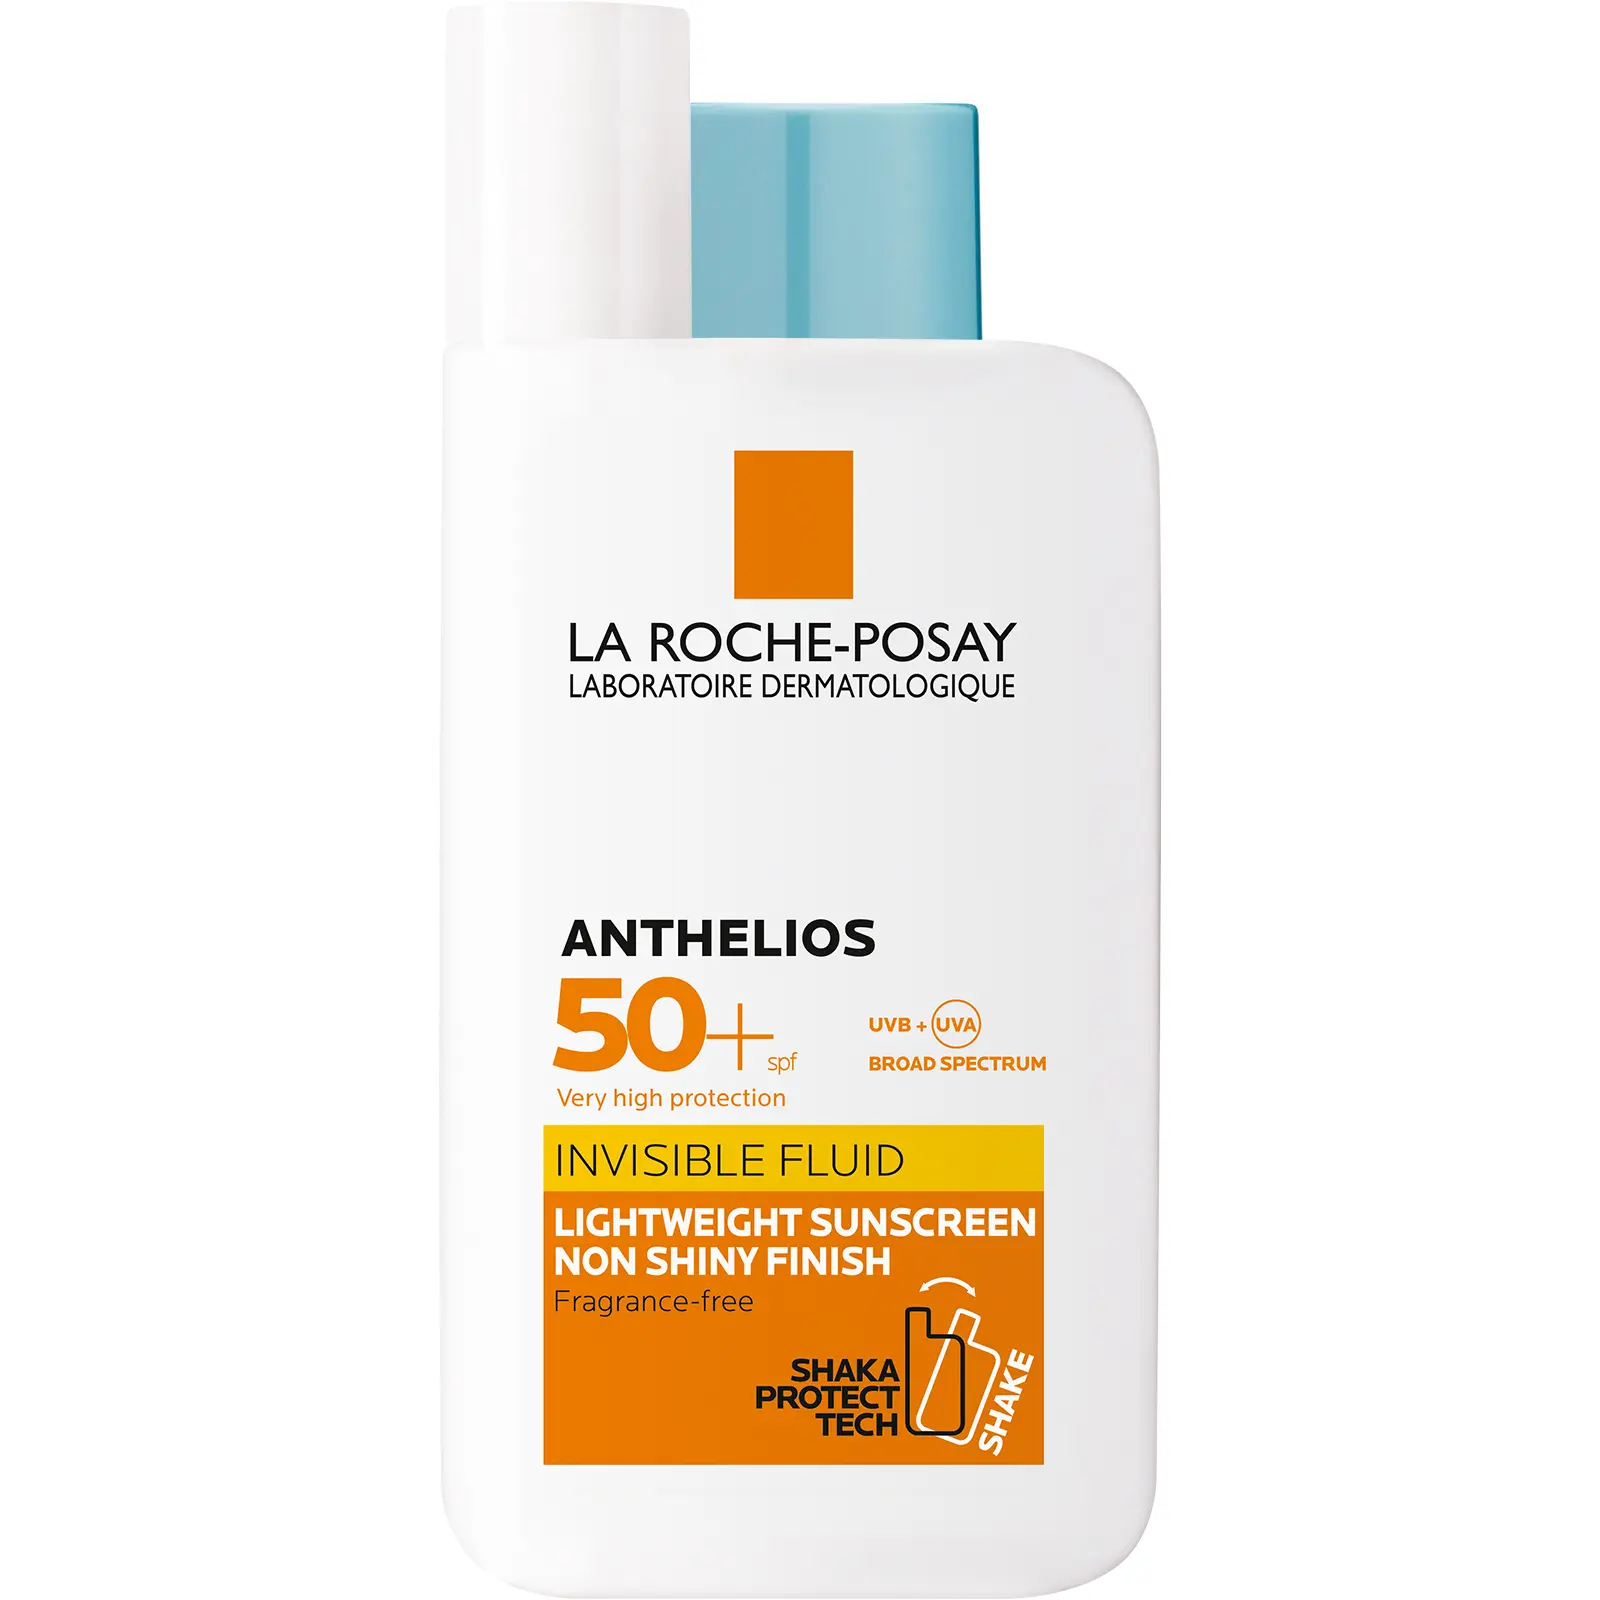 LA-ROCHE-POSAY-Anthelios-Invisible-Fluid-SPF50_OPT